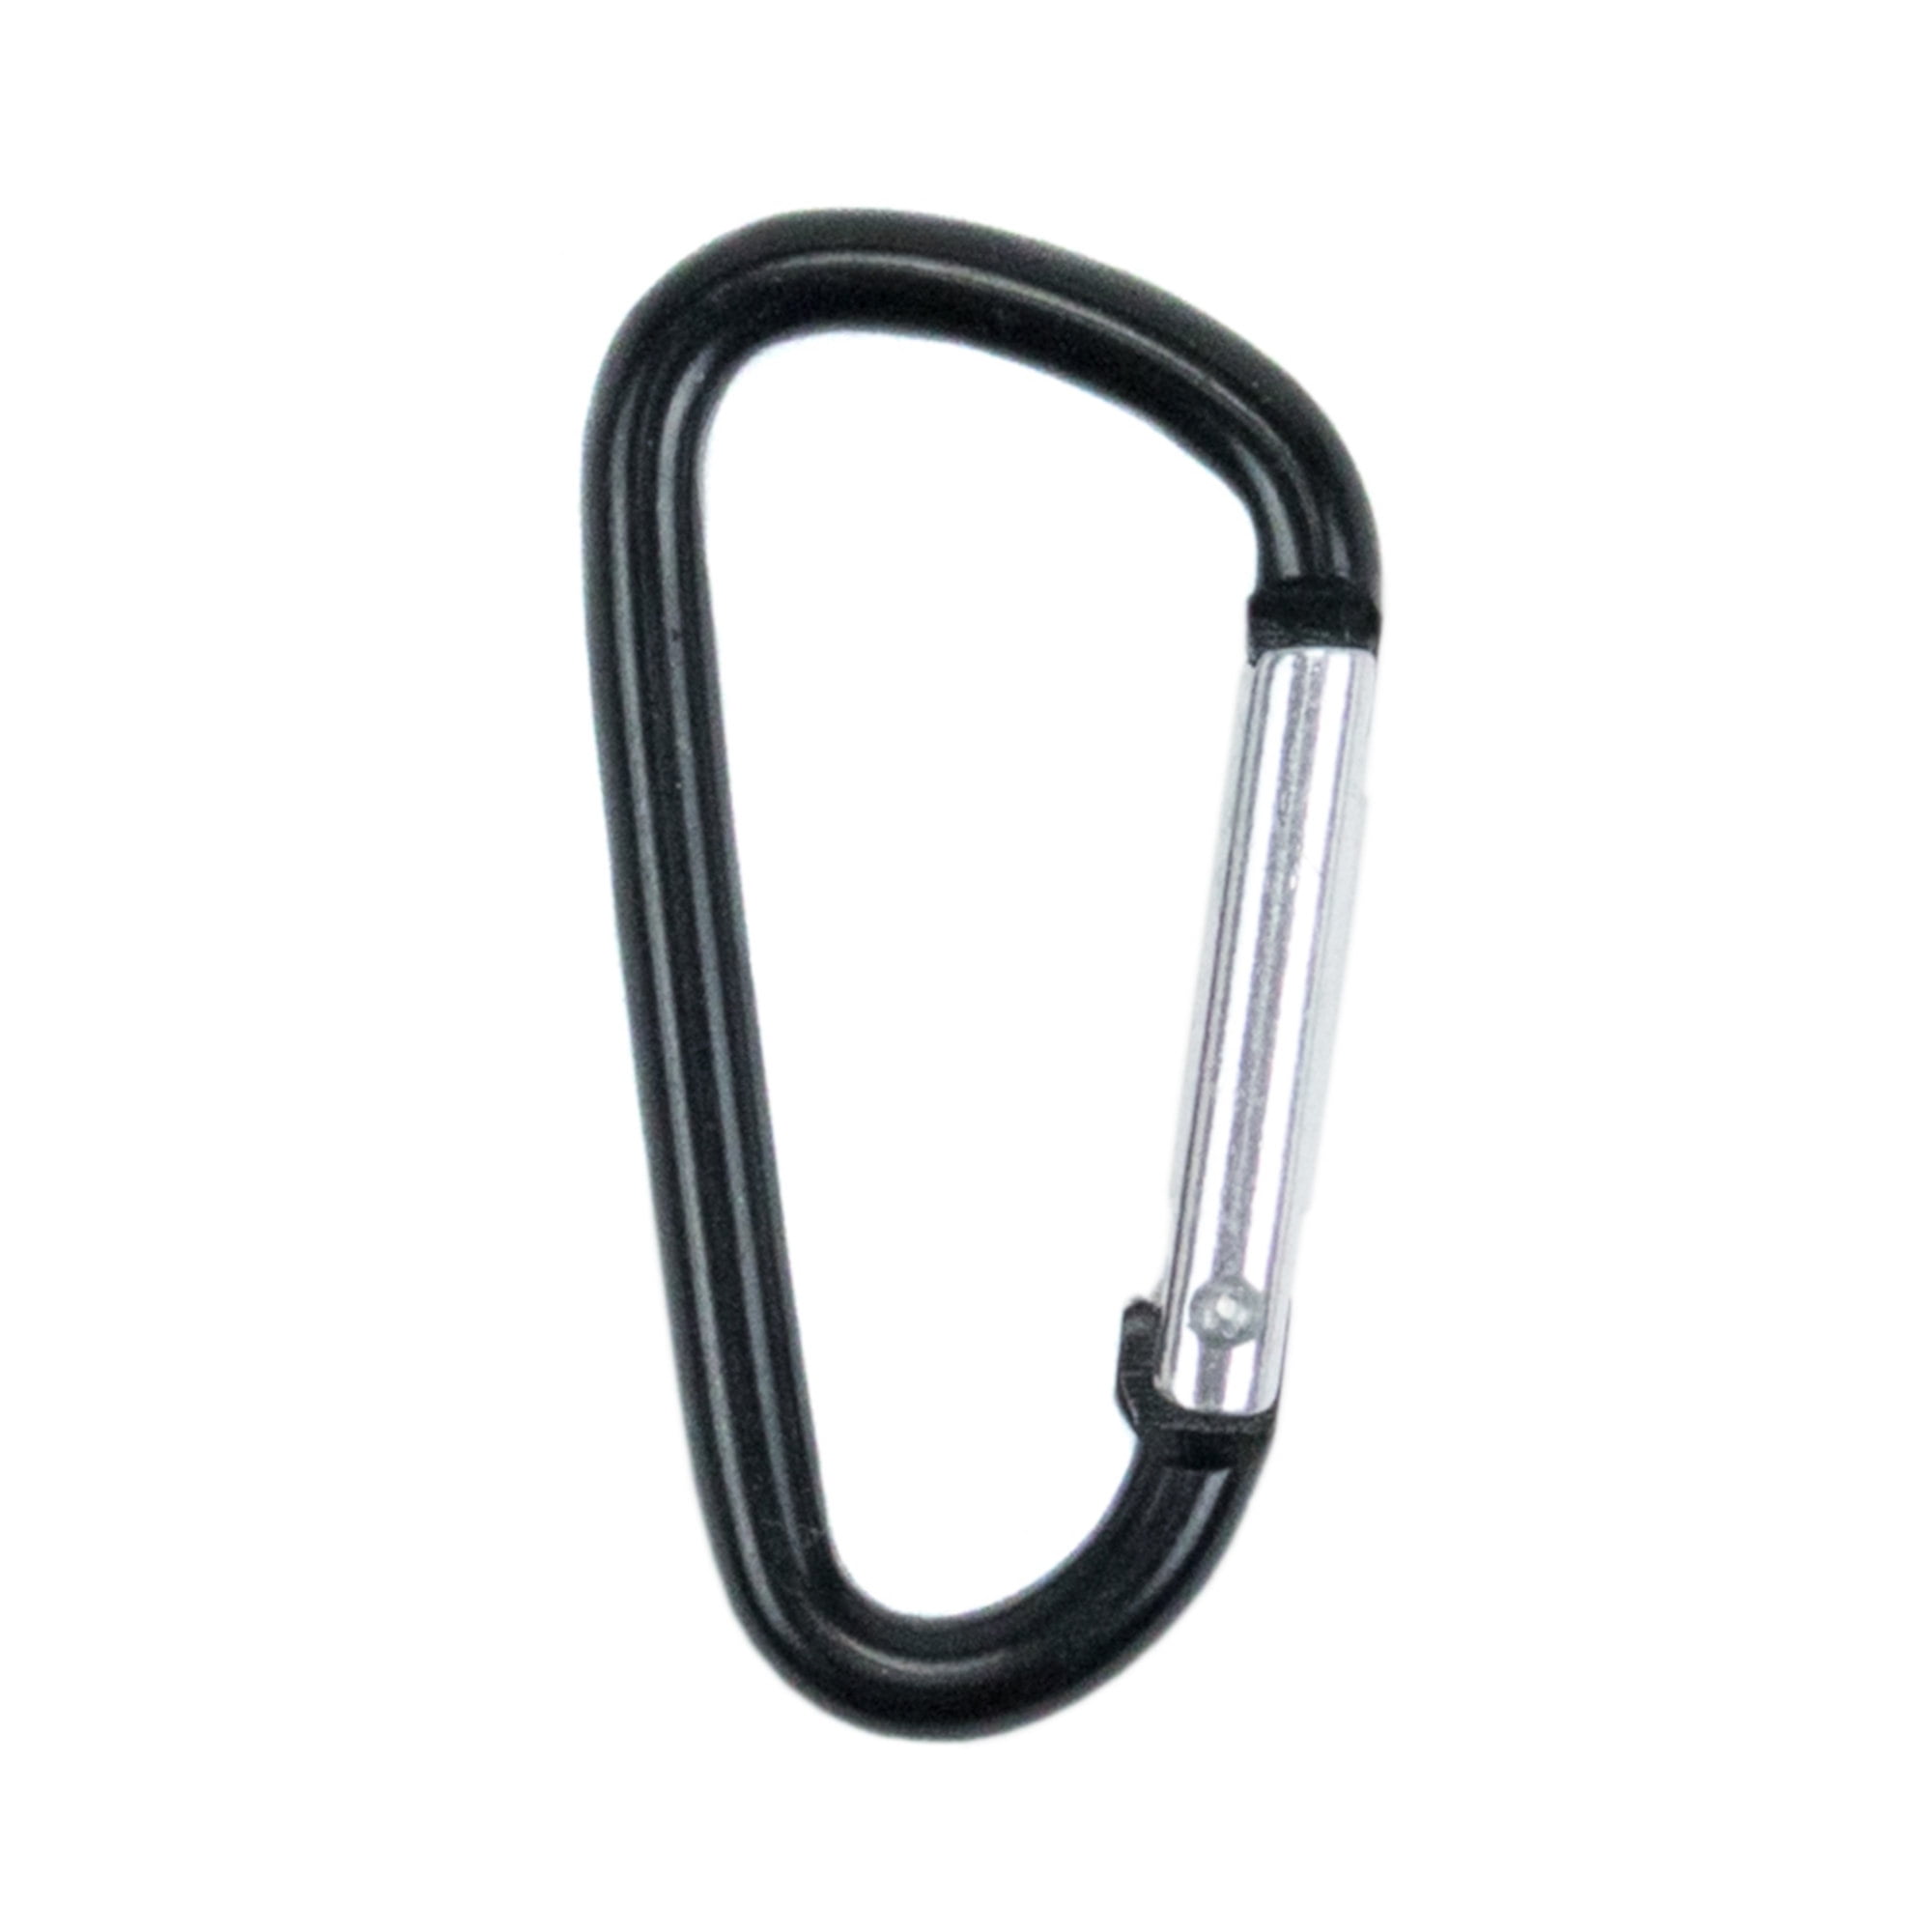 40 mm Durable Aluminum Mini Carabiner Clip Clasp Hook Keychain Spring Load 